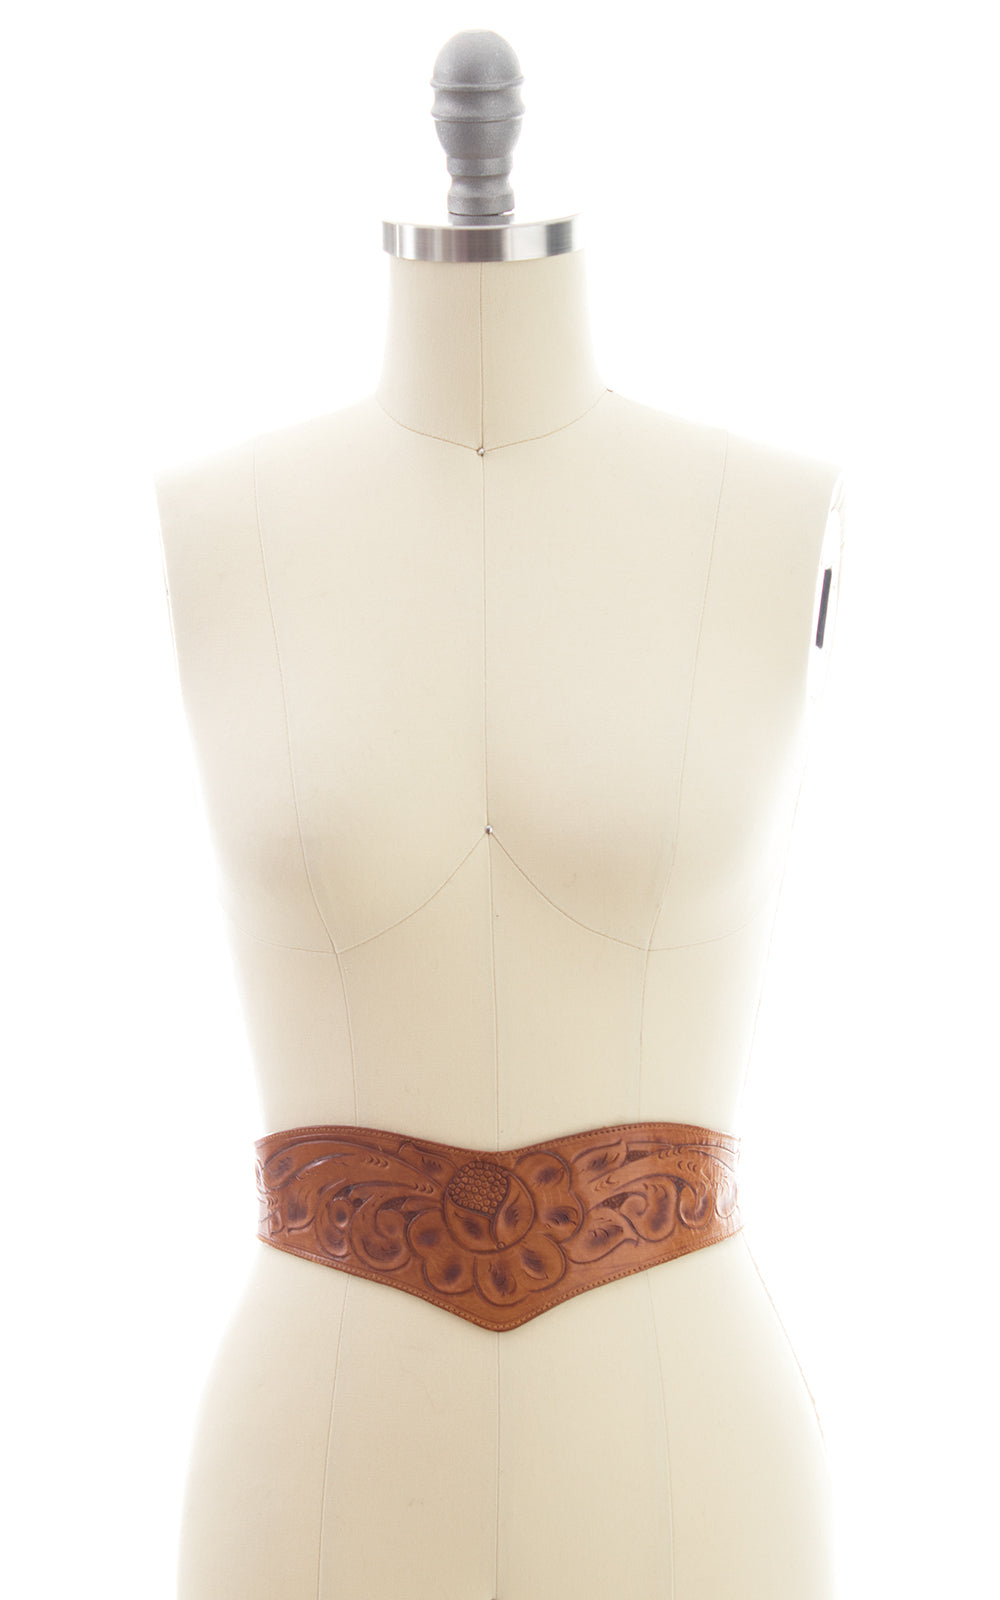 1970s Floral Tooled Leather Double Buckle Cinch Belt